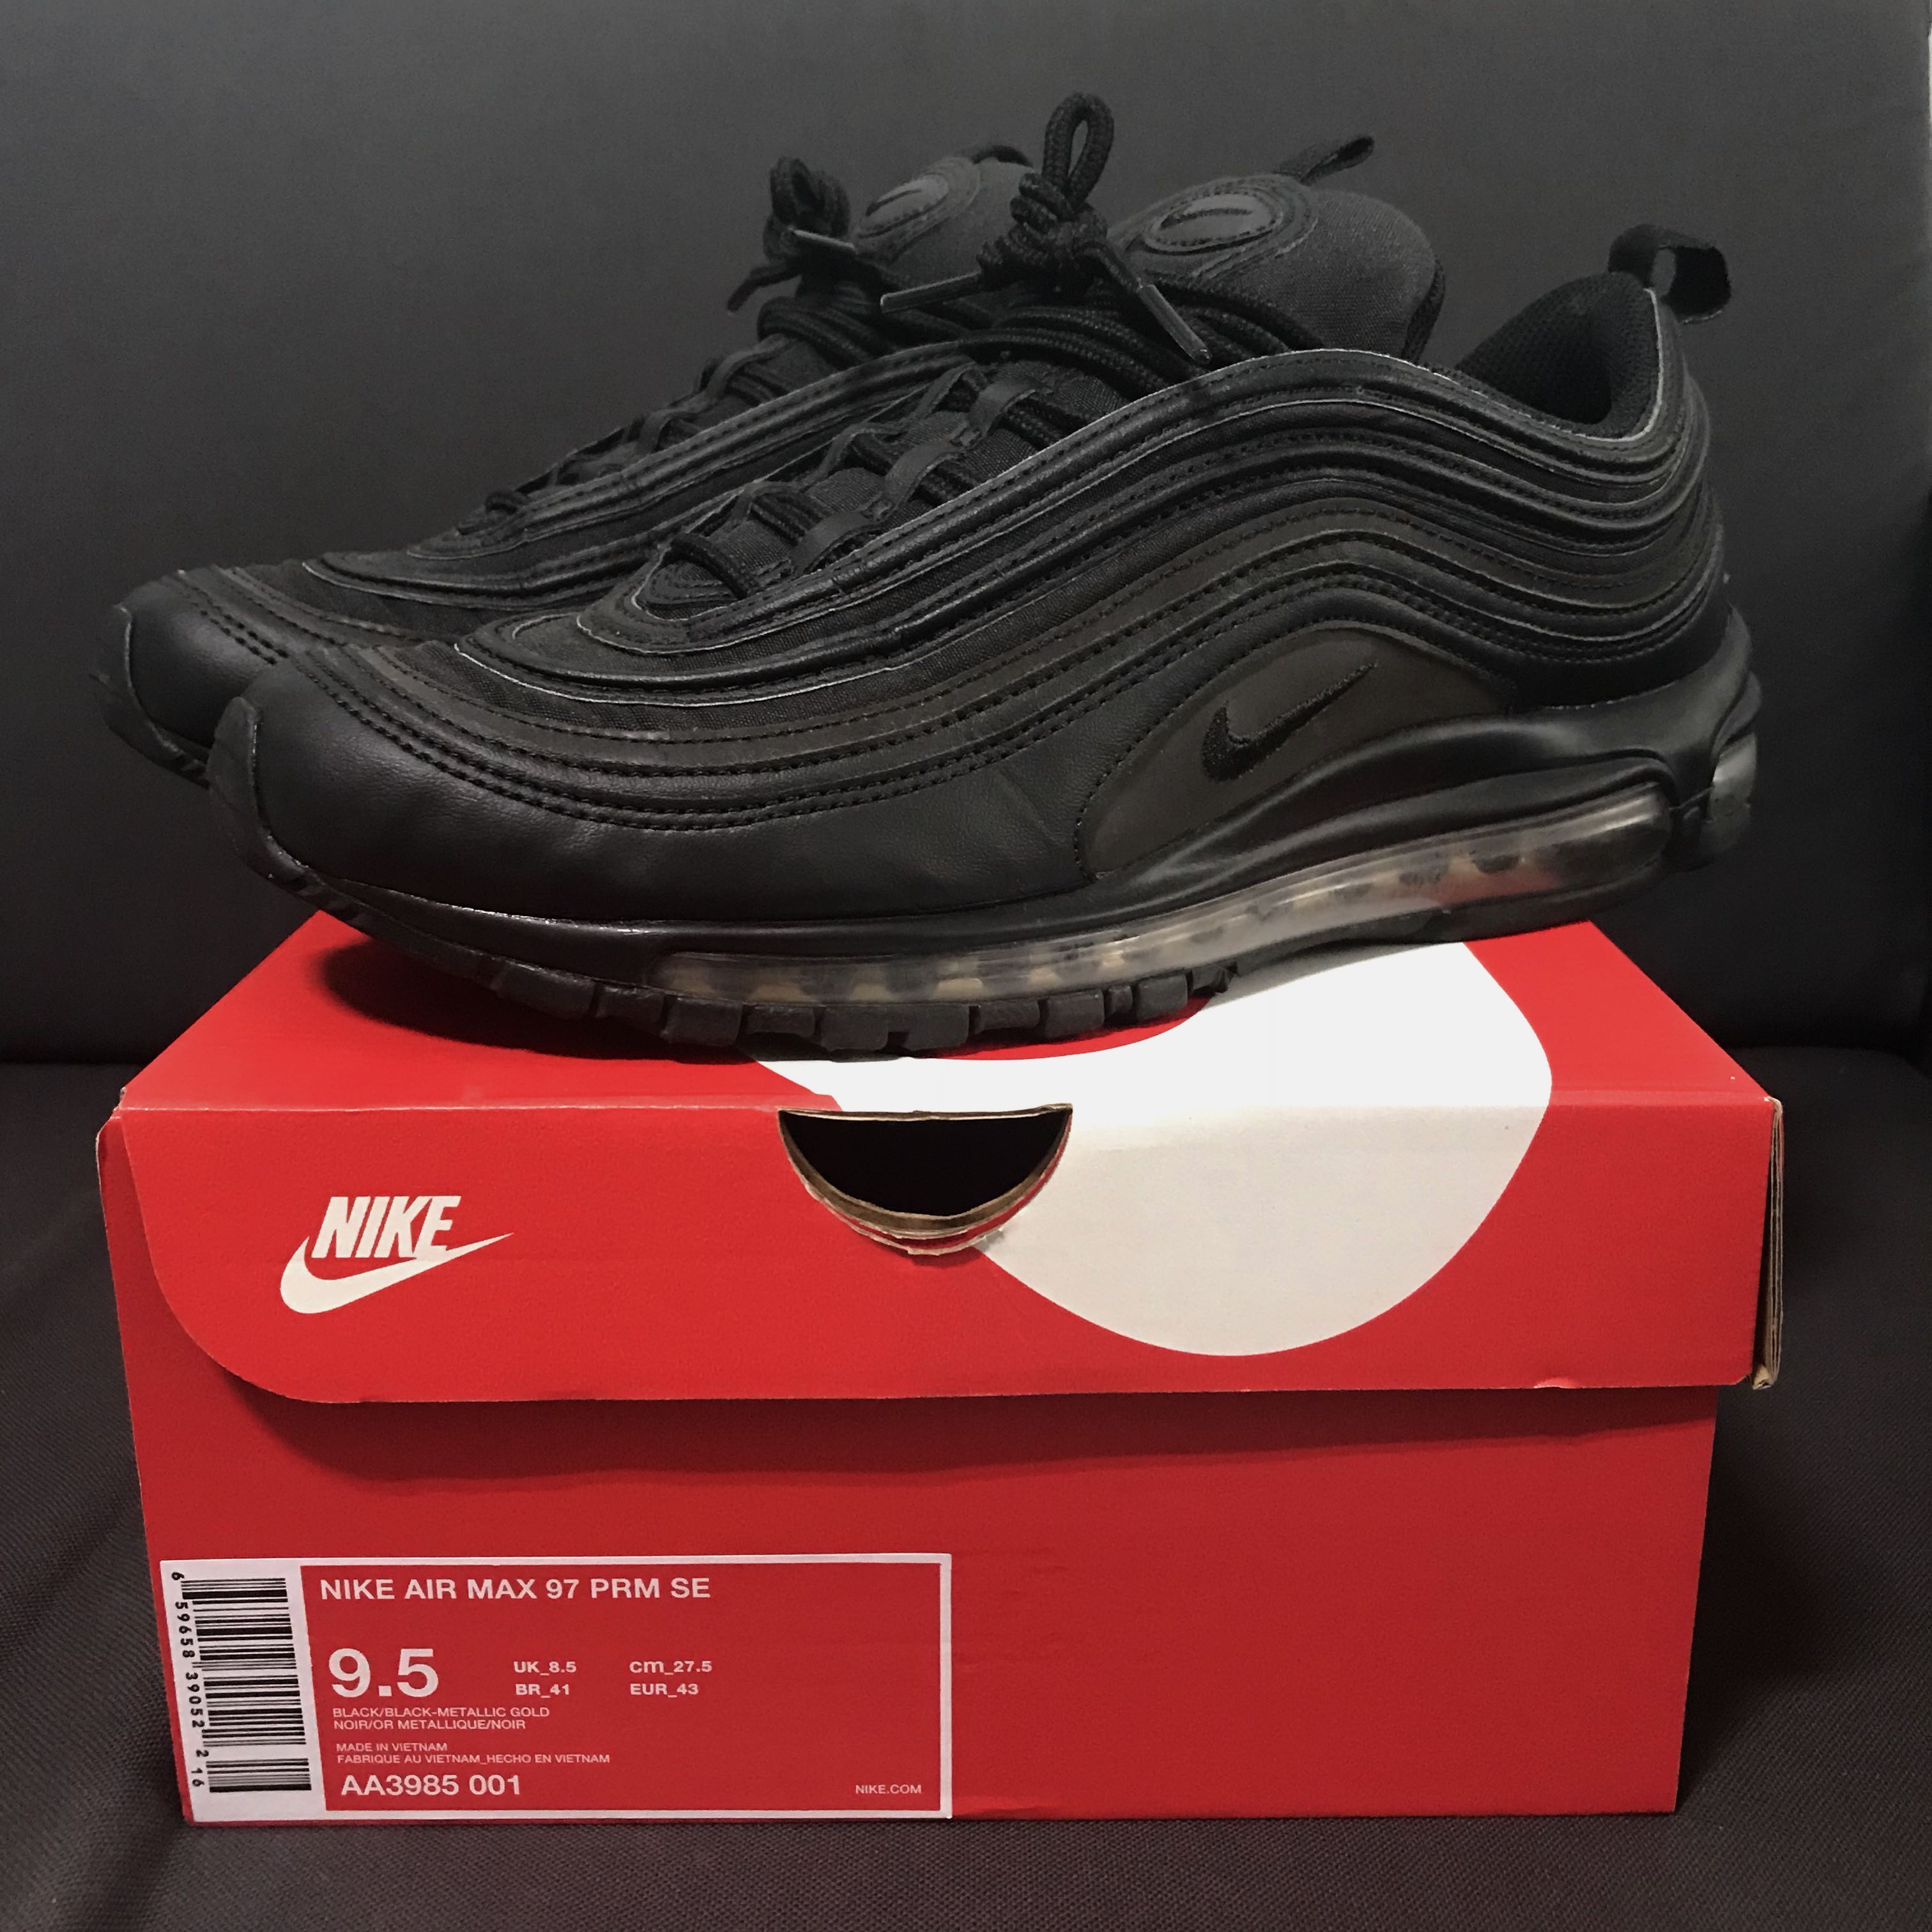 Nike Air Max 97 PRM SE, Men's Fashion, Footwear, Sneakers on Carousell